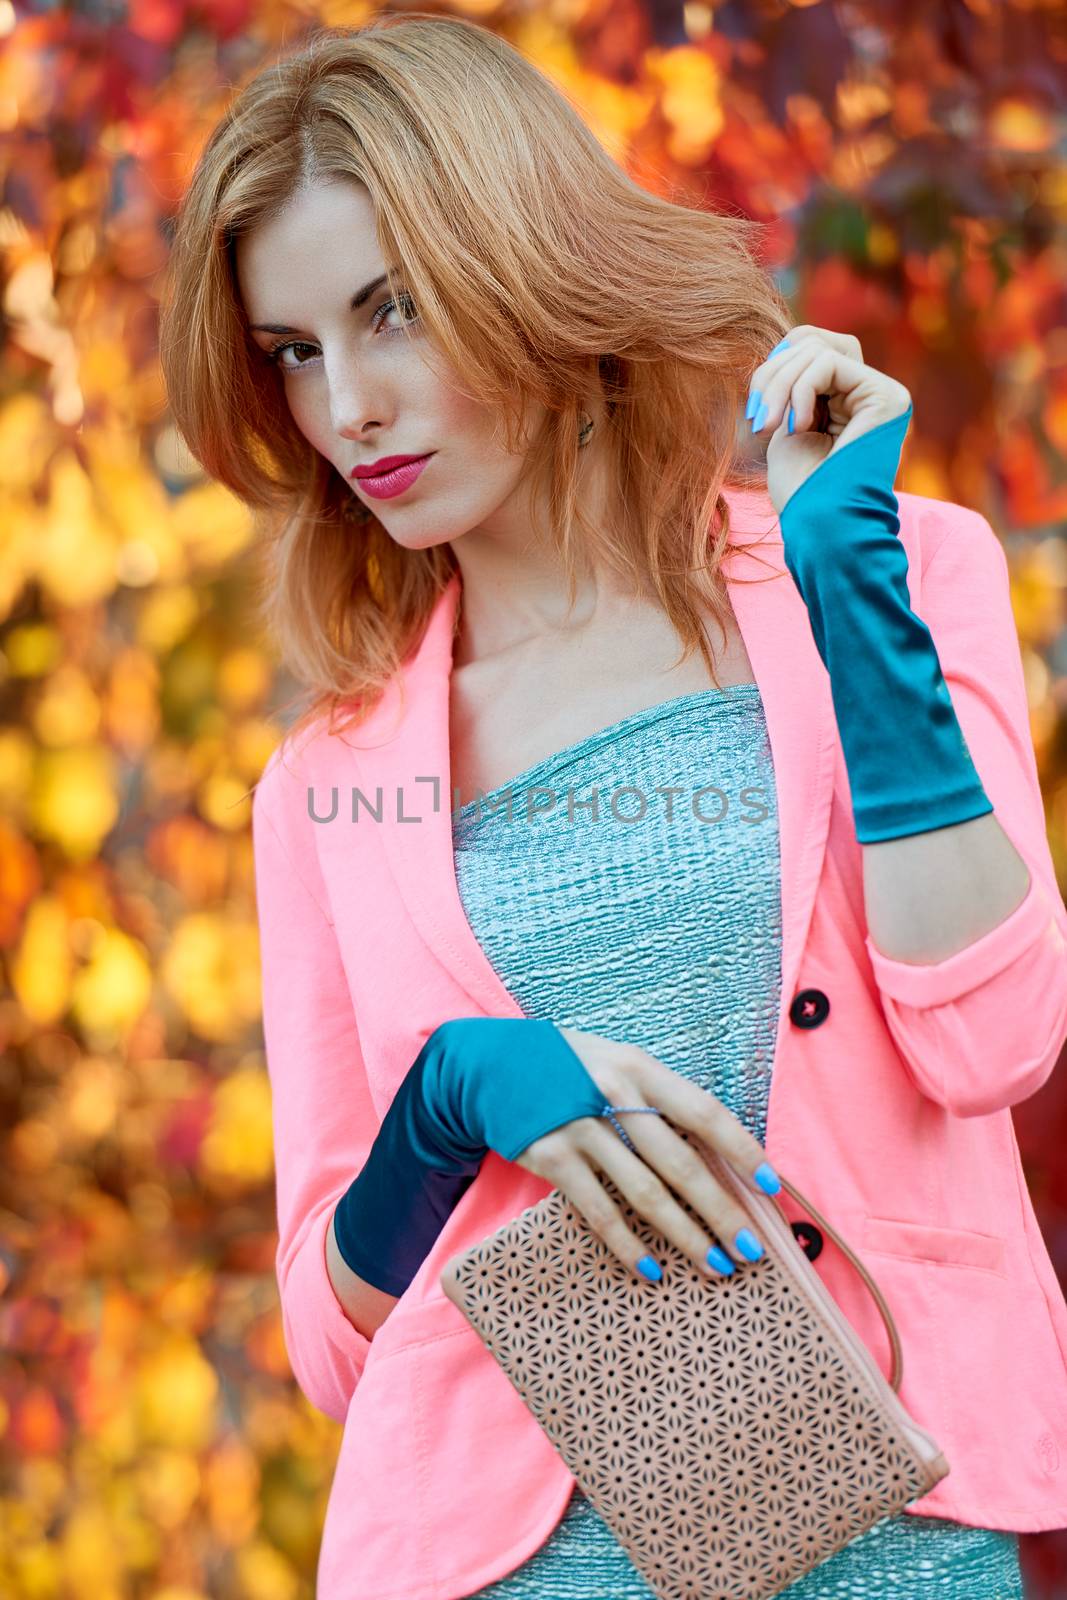 Fashion urban beauty people, woman, outdoor.Playful glamor hipster redhead girl in stylish vivid jacket, gloves with trandy clutch. Sunny day, autumn orange bokeh.Creative unusual, park, lifestyle